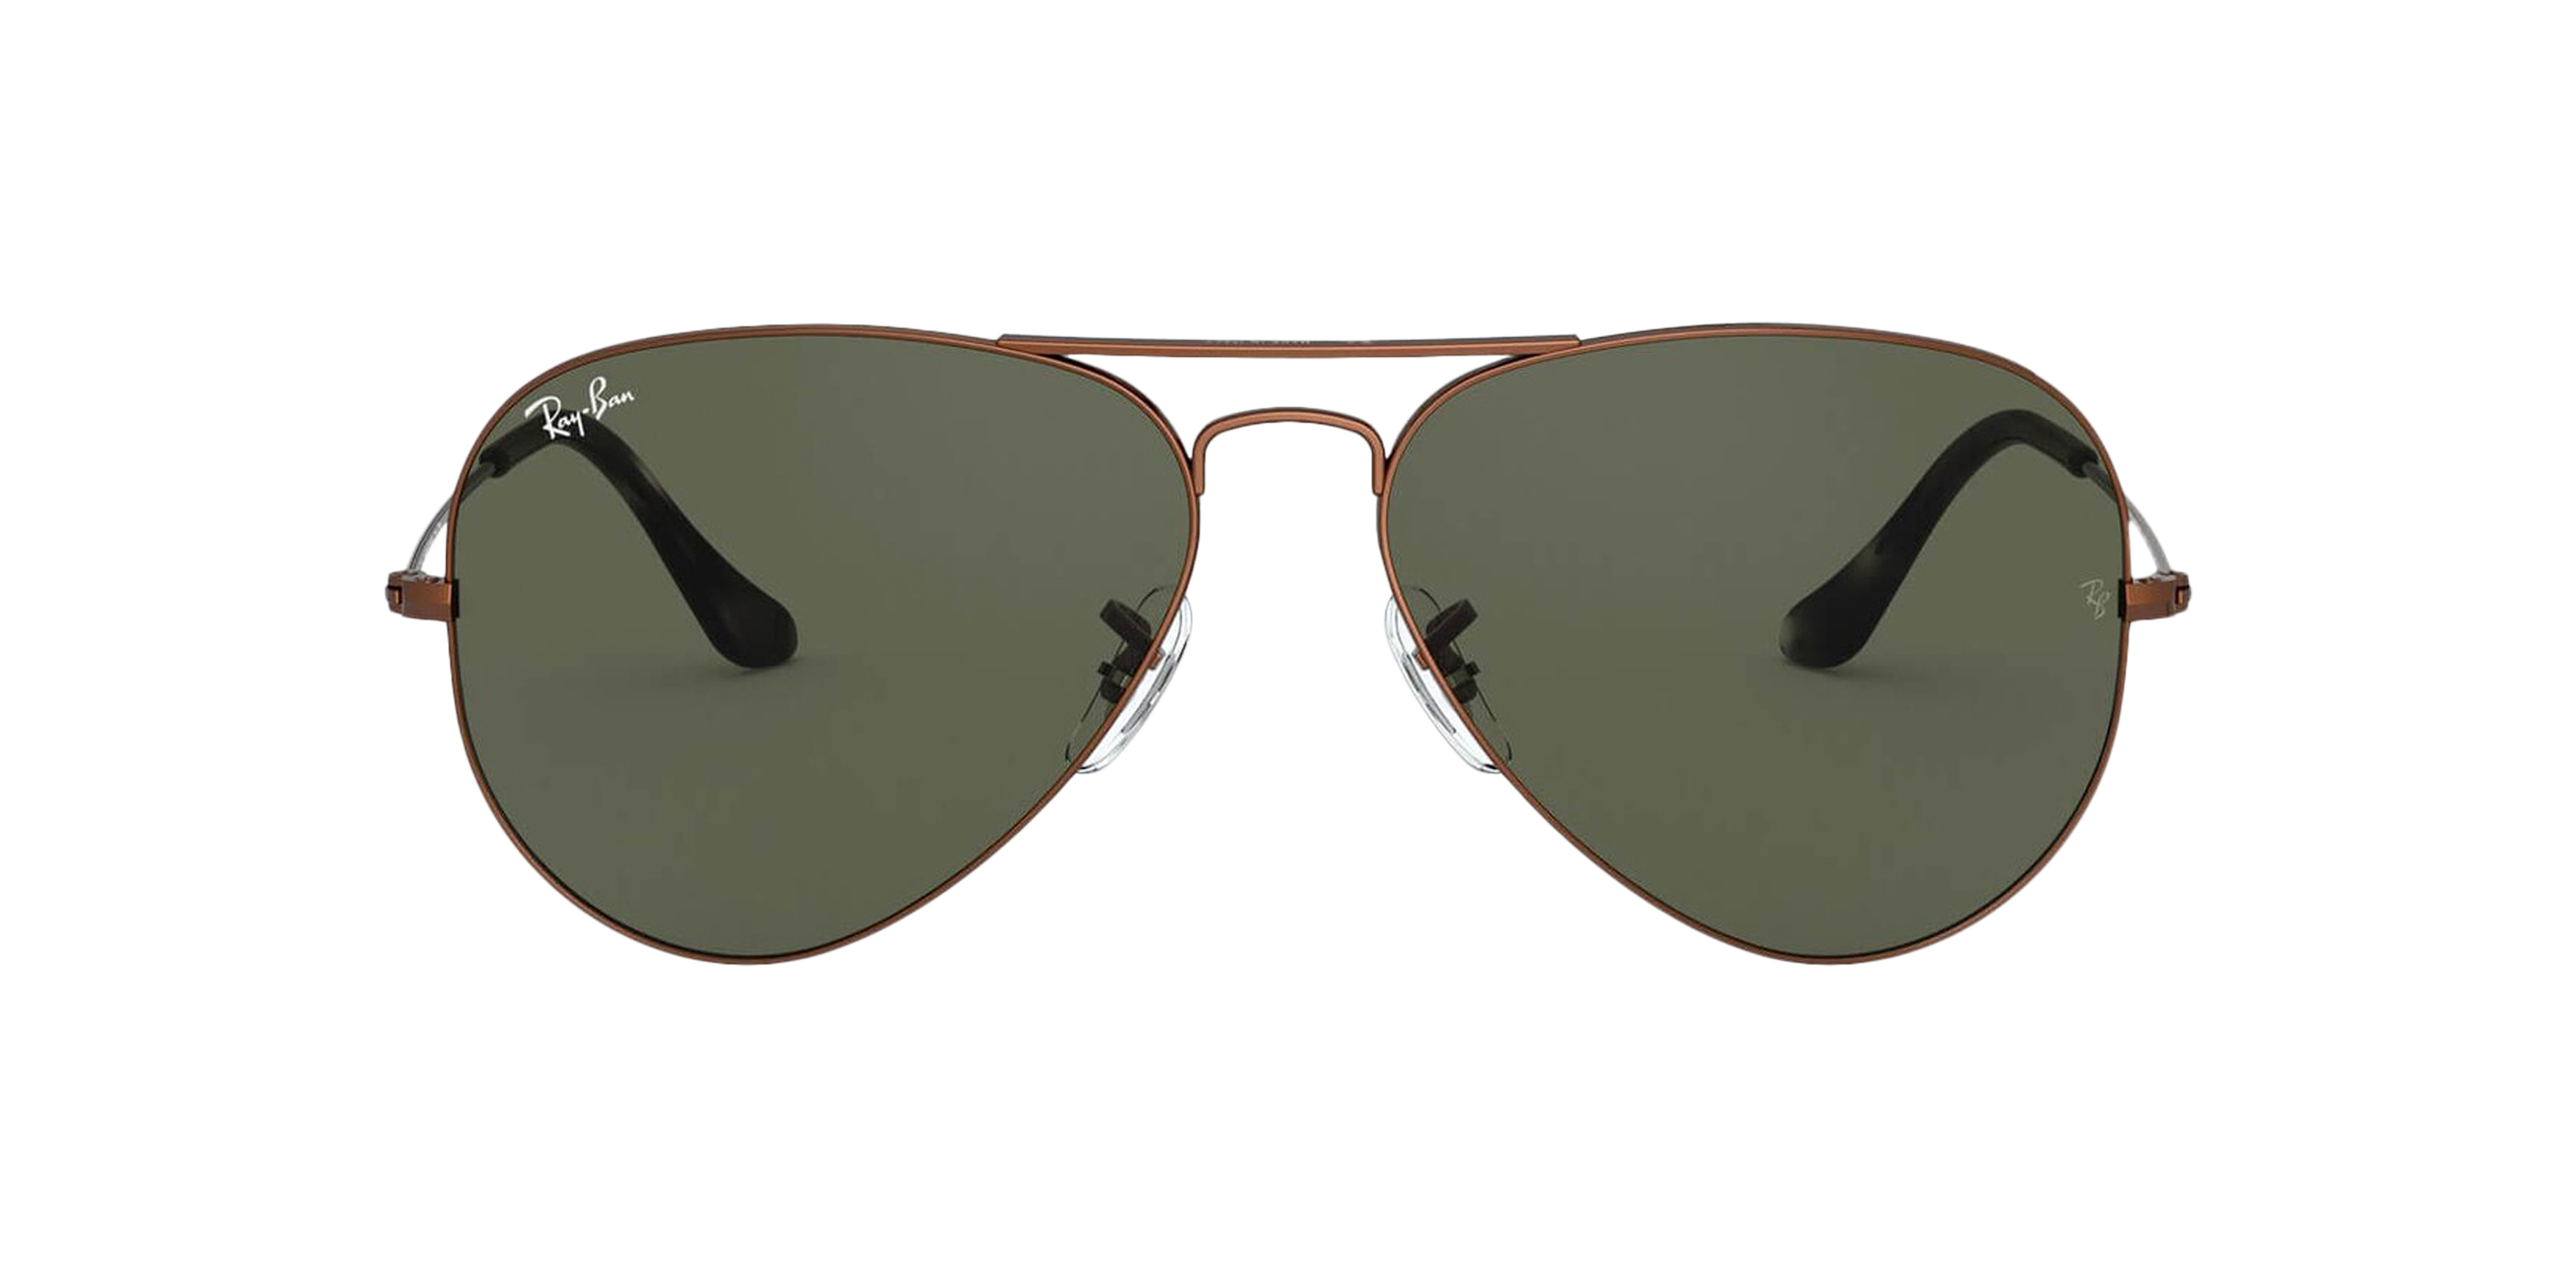 [products.image.front] Ray-Ban Aviator Classic RB3025 918931